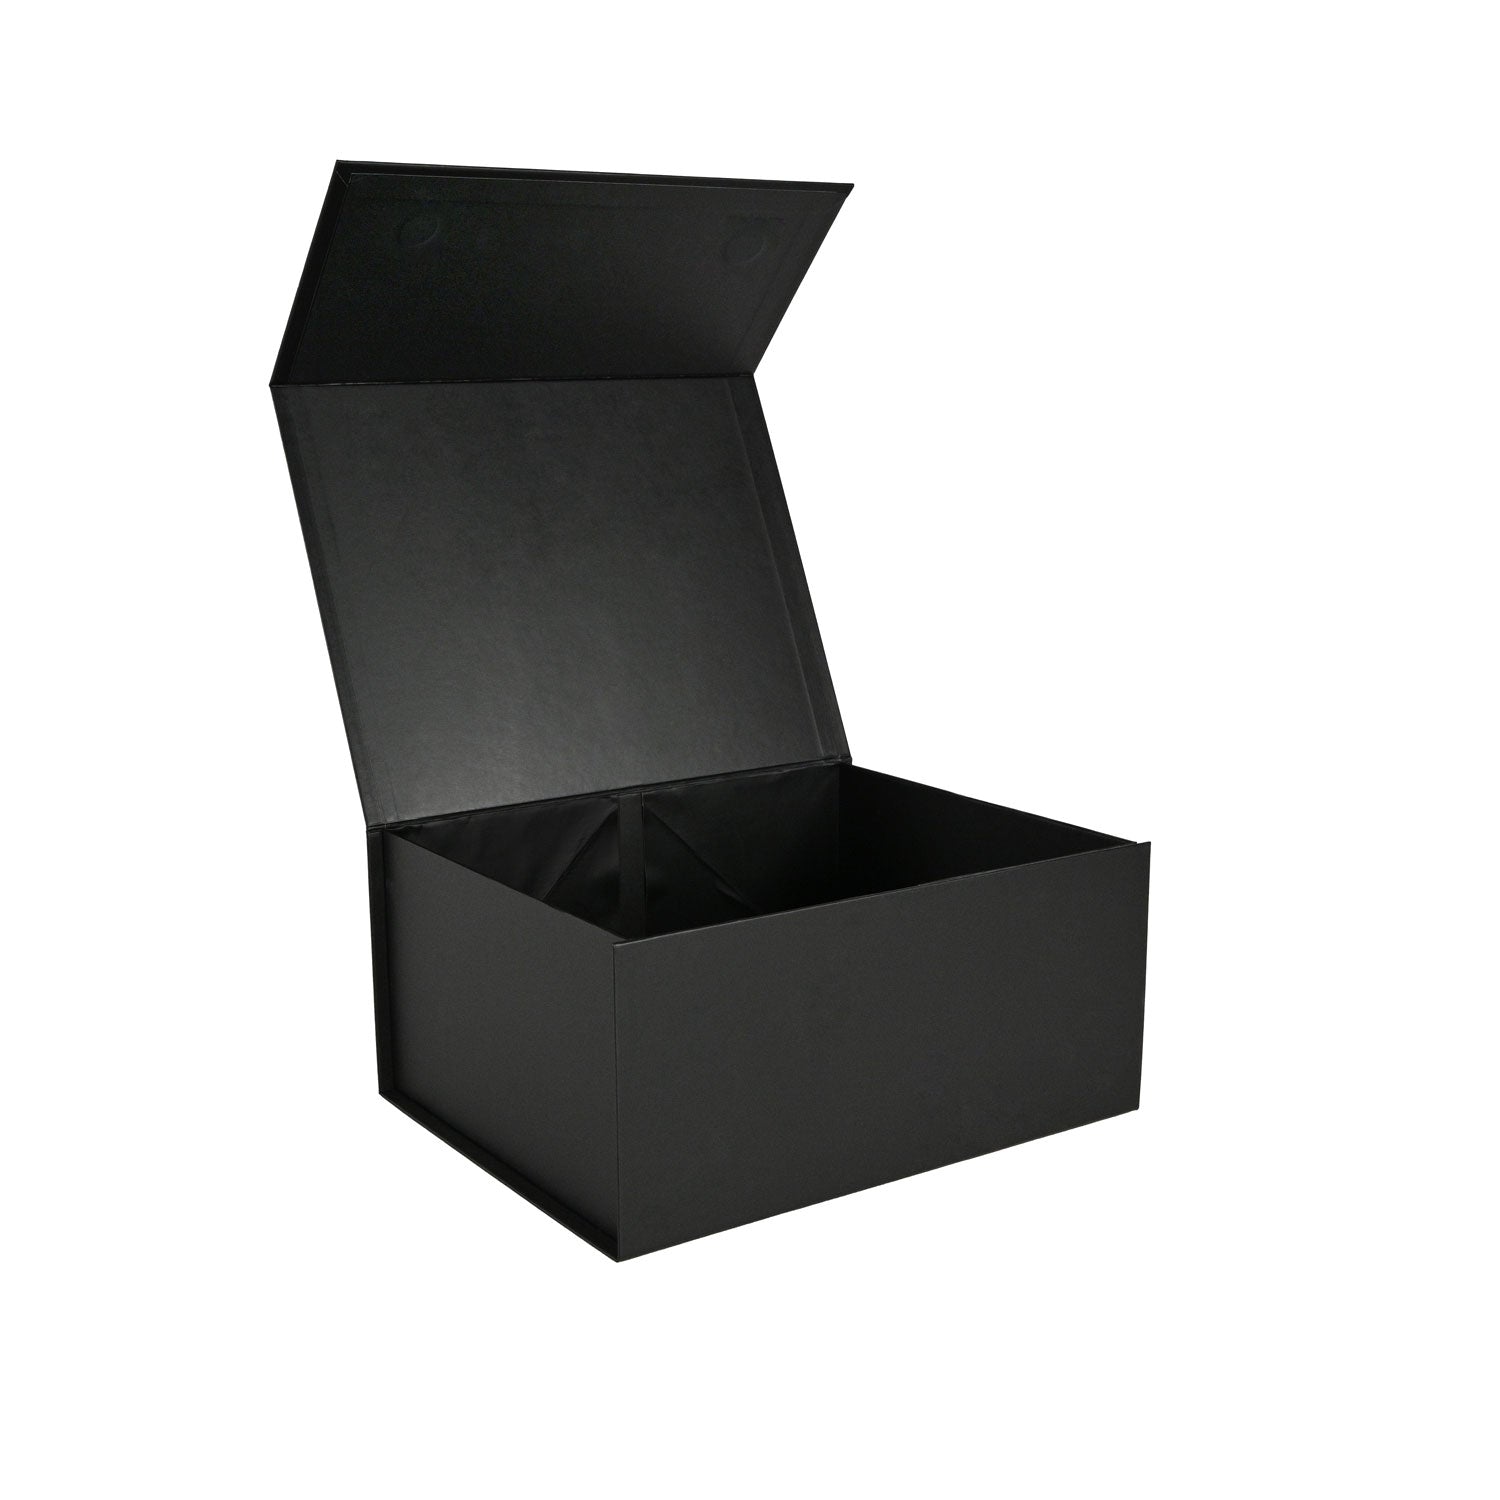 Medium sleek magnetic balck gift box, perfect for special occasions | NEON Packaging